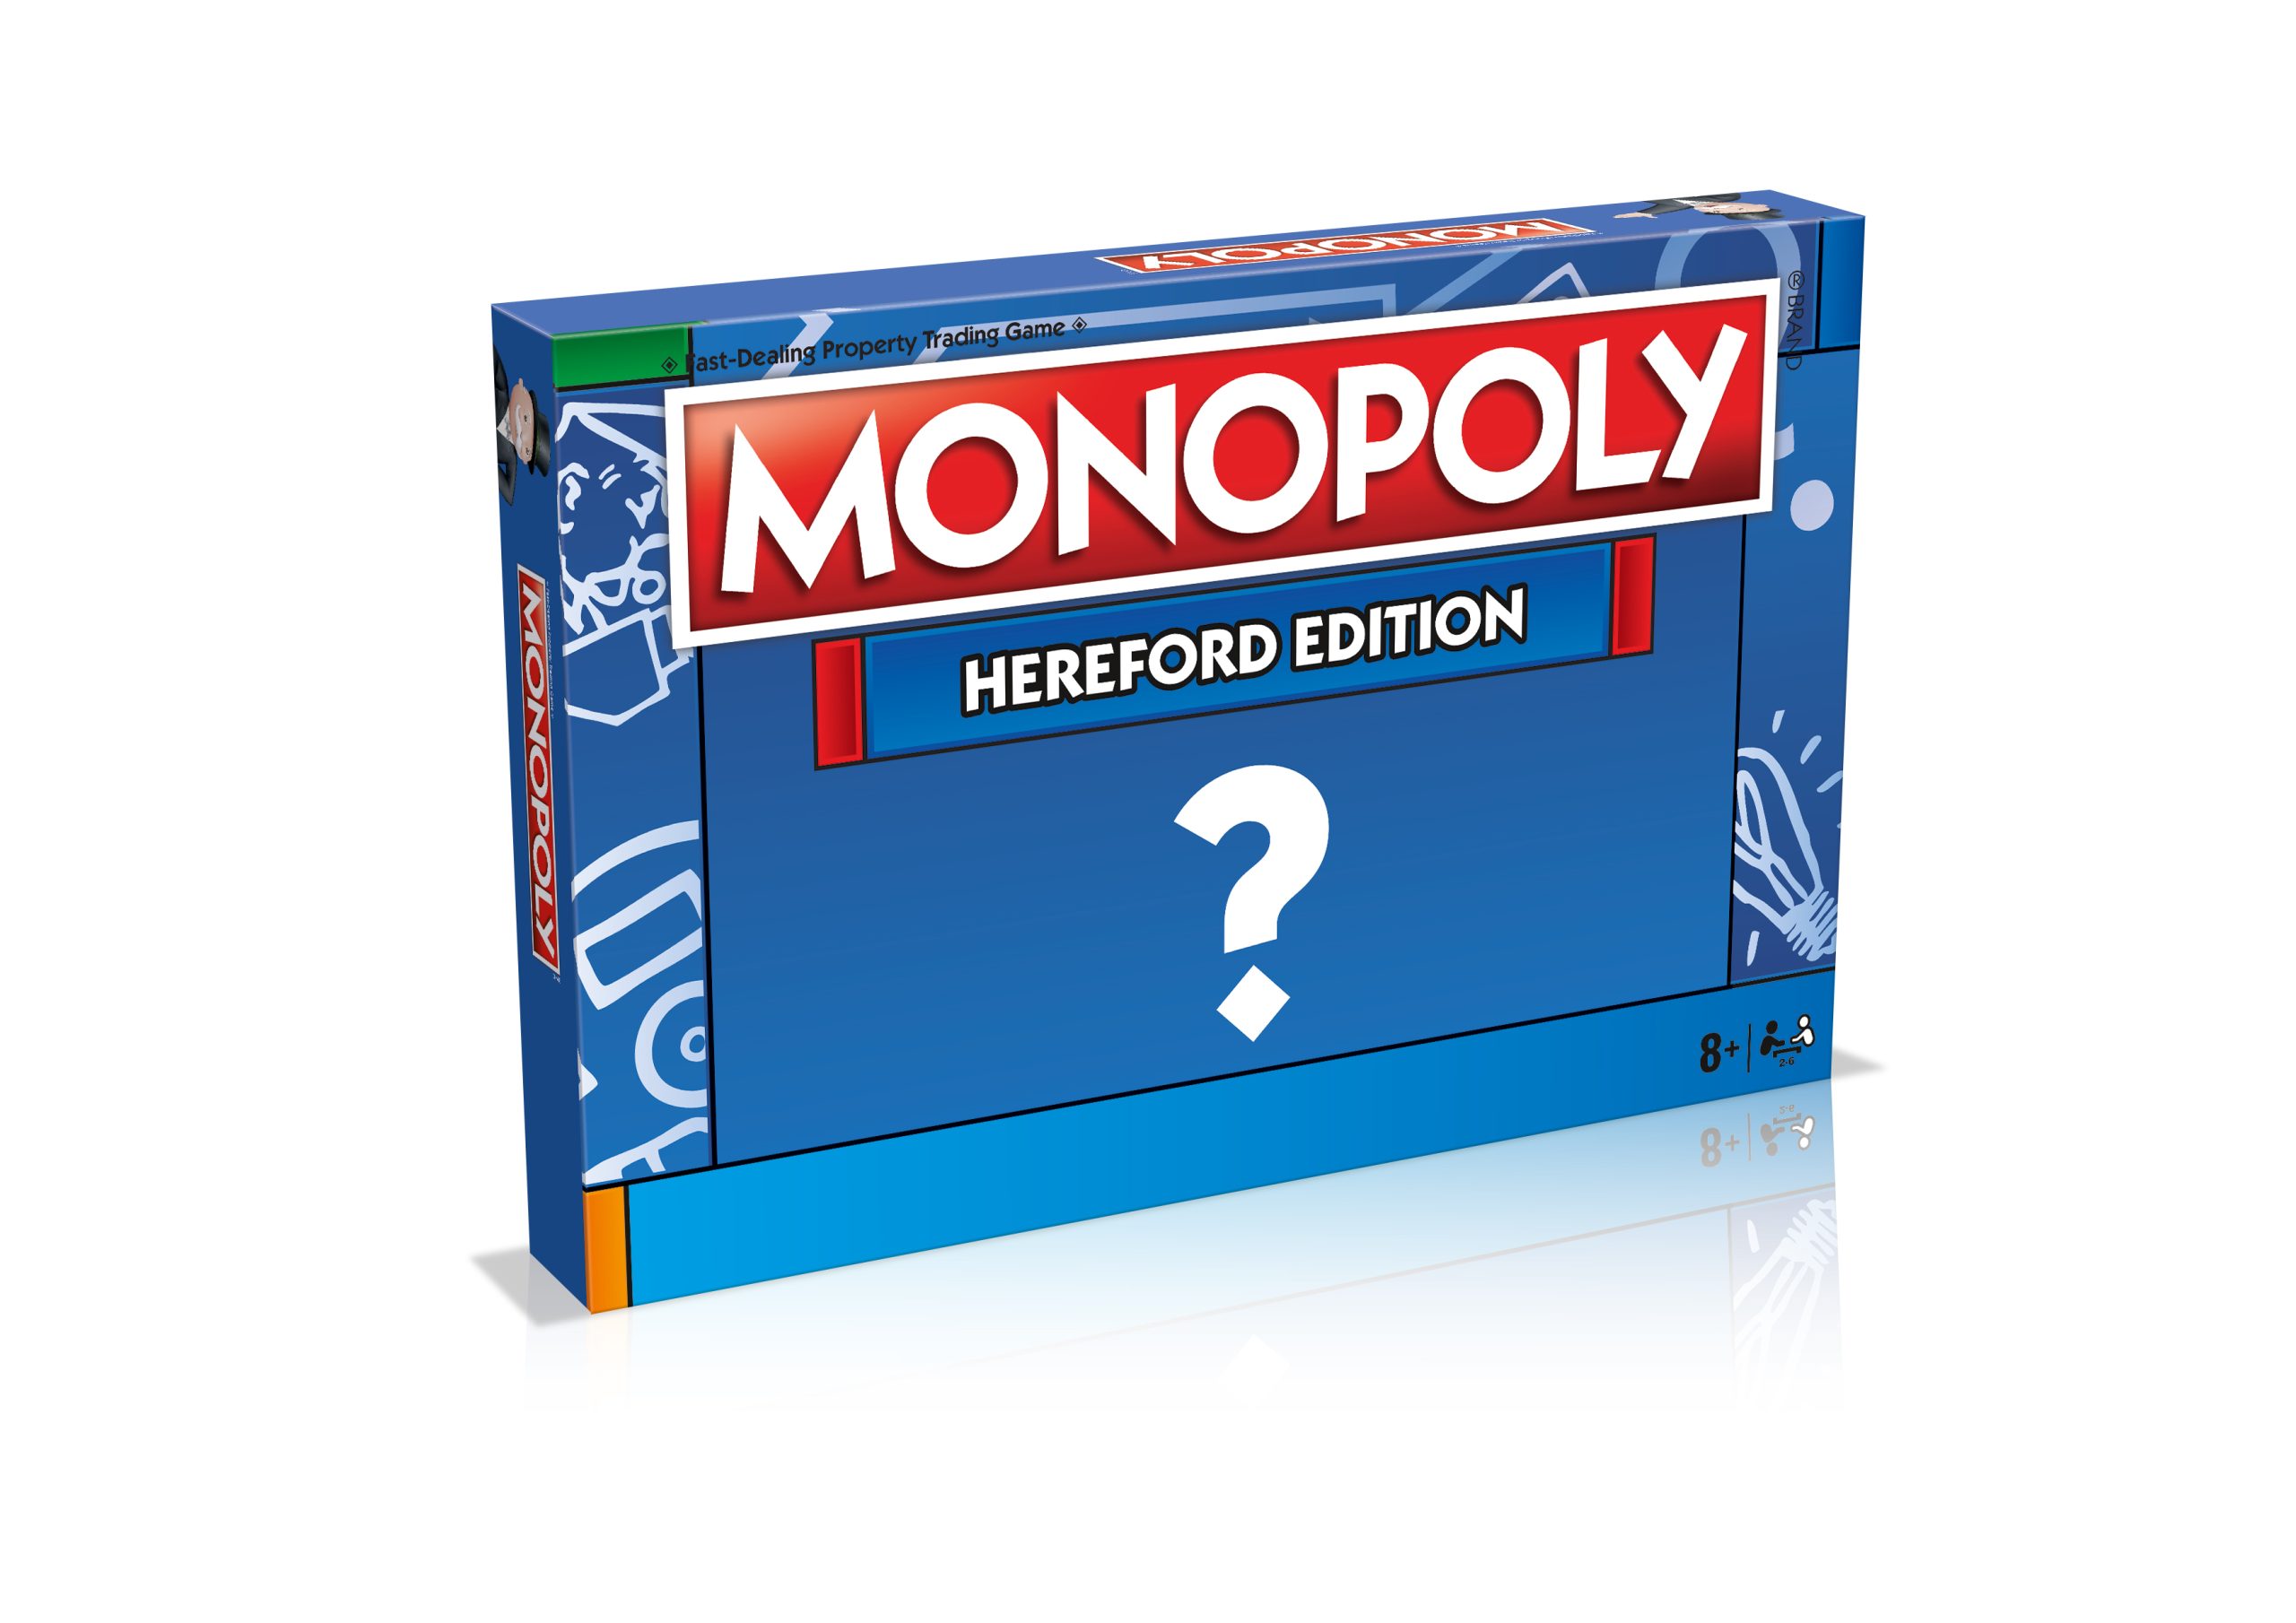 NEWS | Hereford sees off 24 rivals to land its’ very own official MONOPOLY board